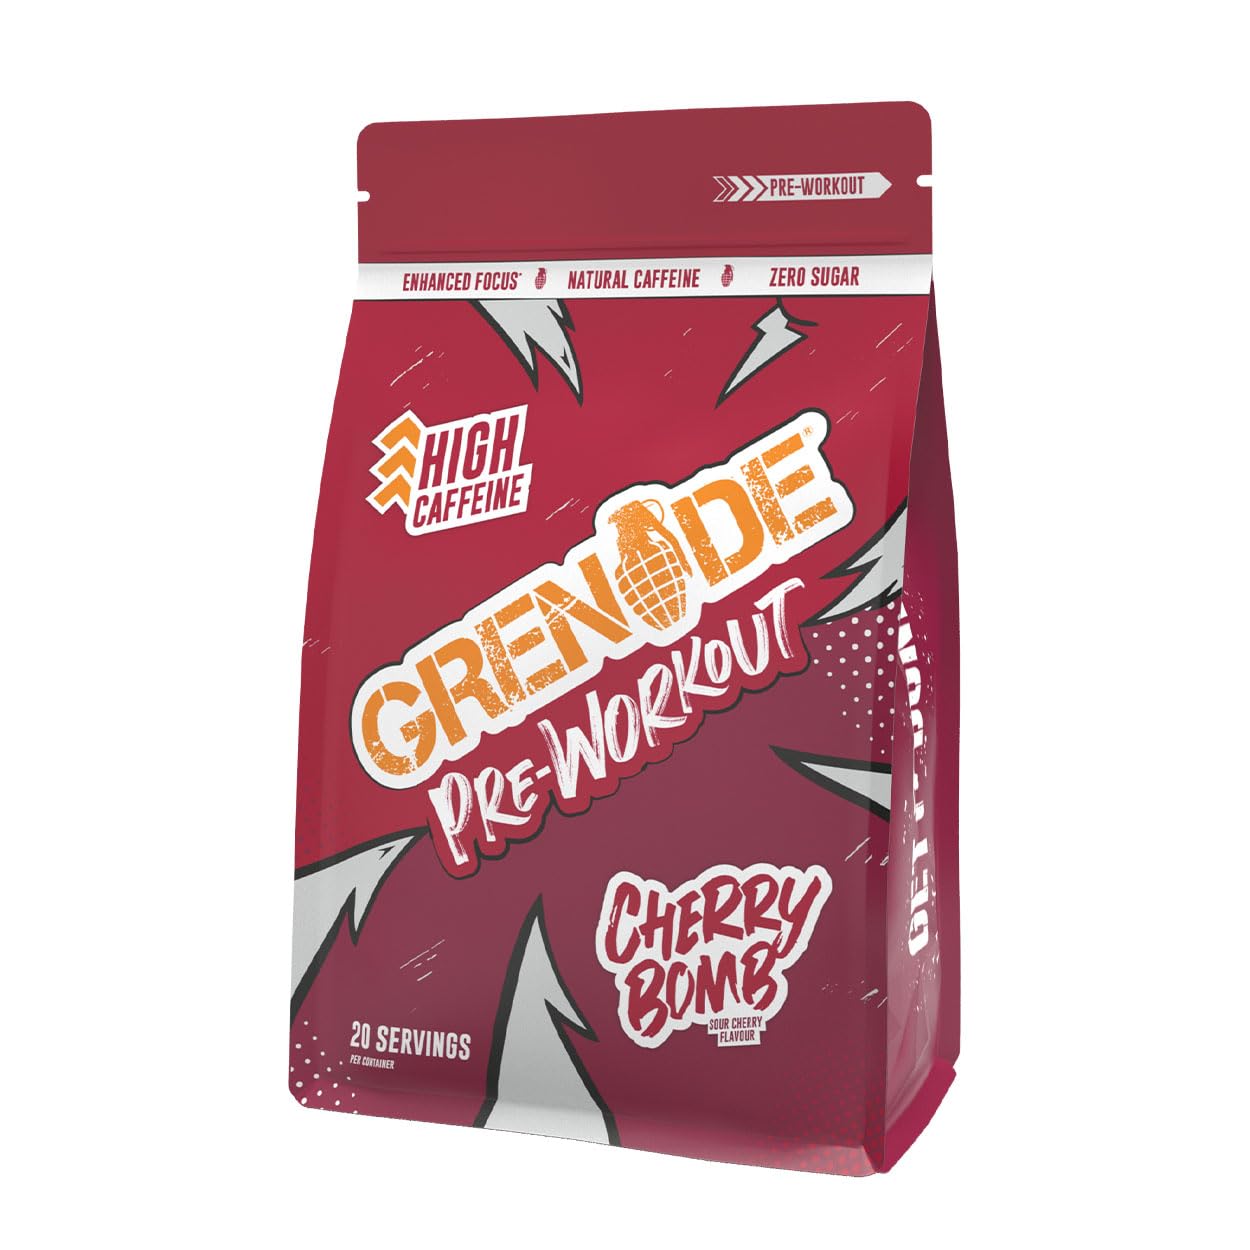 Grenade High Caffeine Pre Workout Powder with Natural Caffeine, Citrulline, Beta Alanine, Tyrosine & Betaine (20 Servings) - Cherry Bomb, 330 g (Pack of 1)